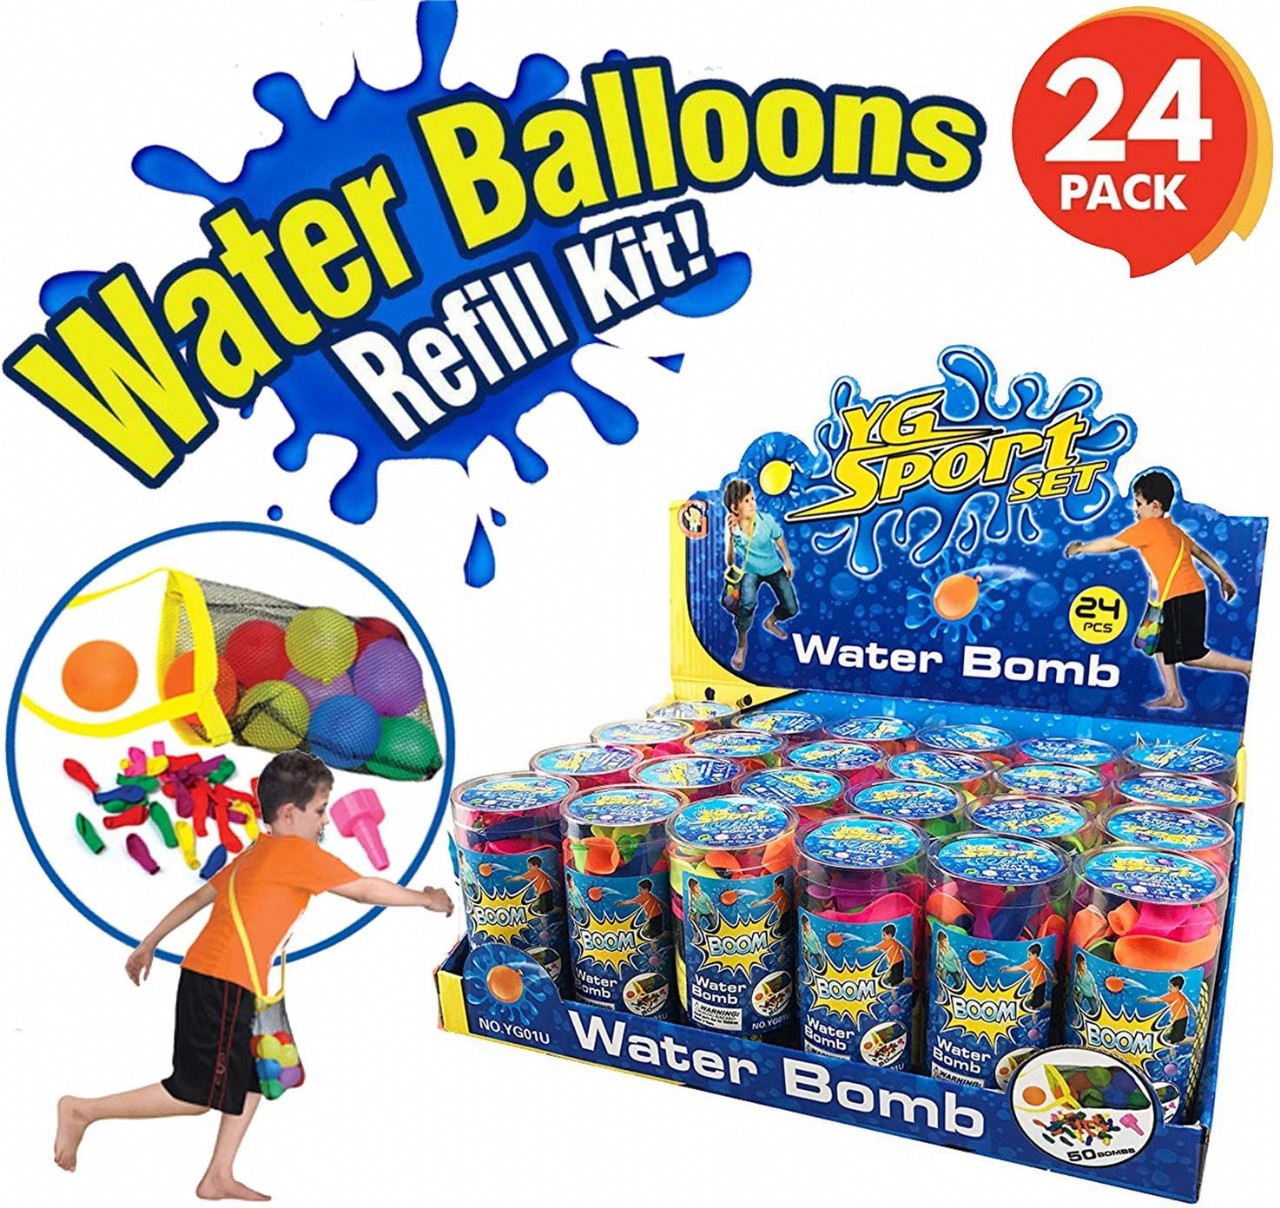 24 Pack - Refill Kits of Latex Water Balloons Bomb - Summer Water Balloon Fight, Party Favors, Sport